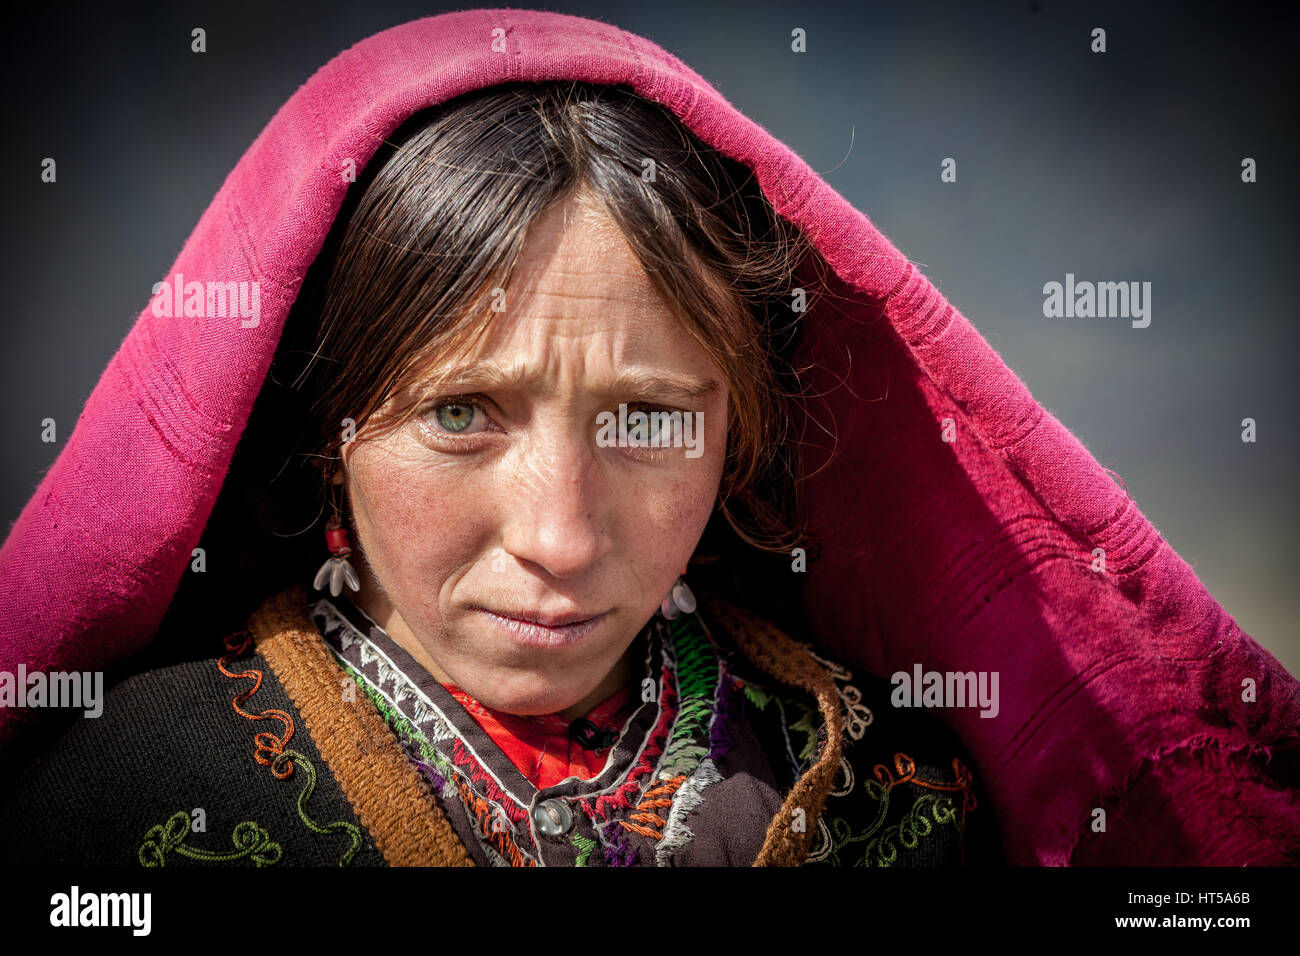 Afghanistan, Wakhan corridor, a portrait of Afghan woman with red veil and blue eyes. Stock Photo